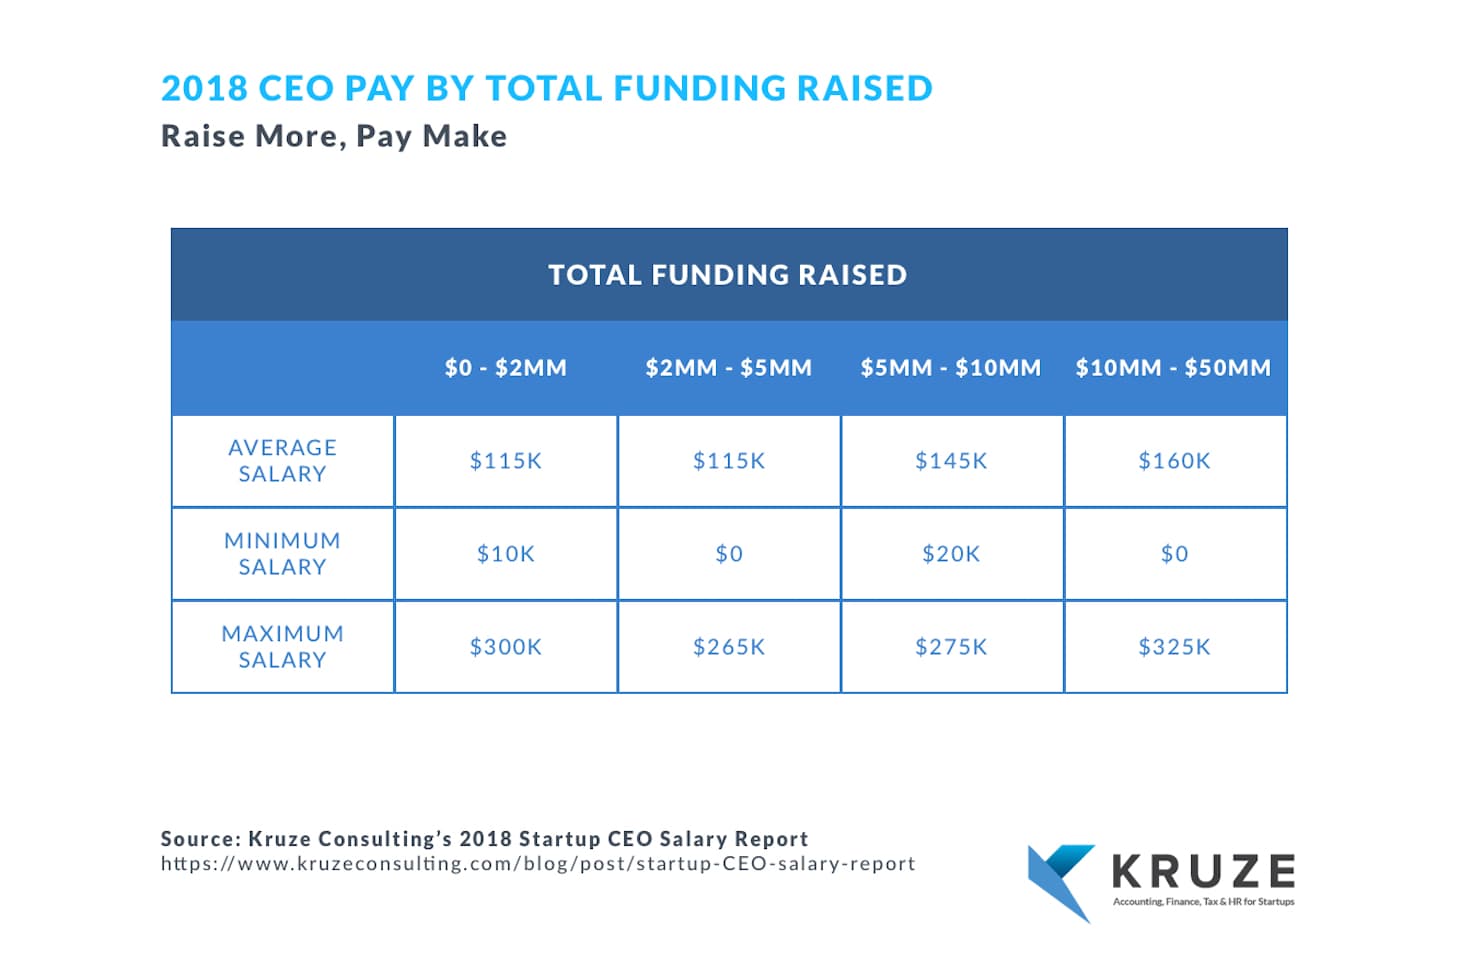 2018 ceo pay by total funding raised table